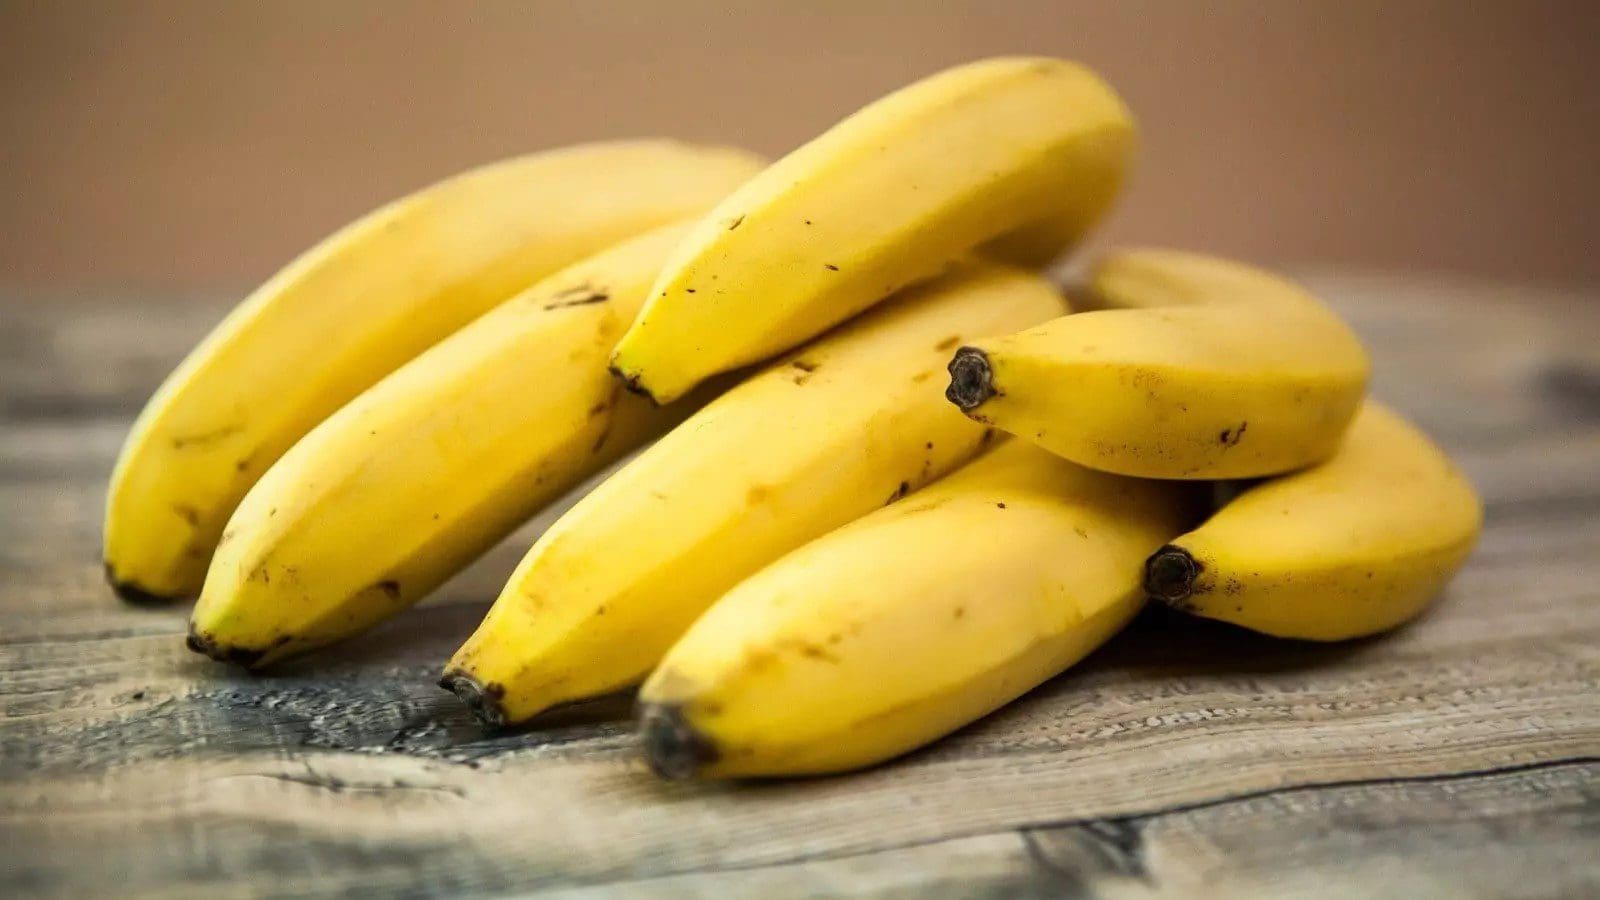 AgDevCo expands portfolio to develop banana industry in Mozambique